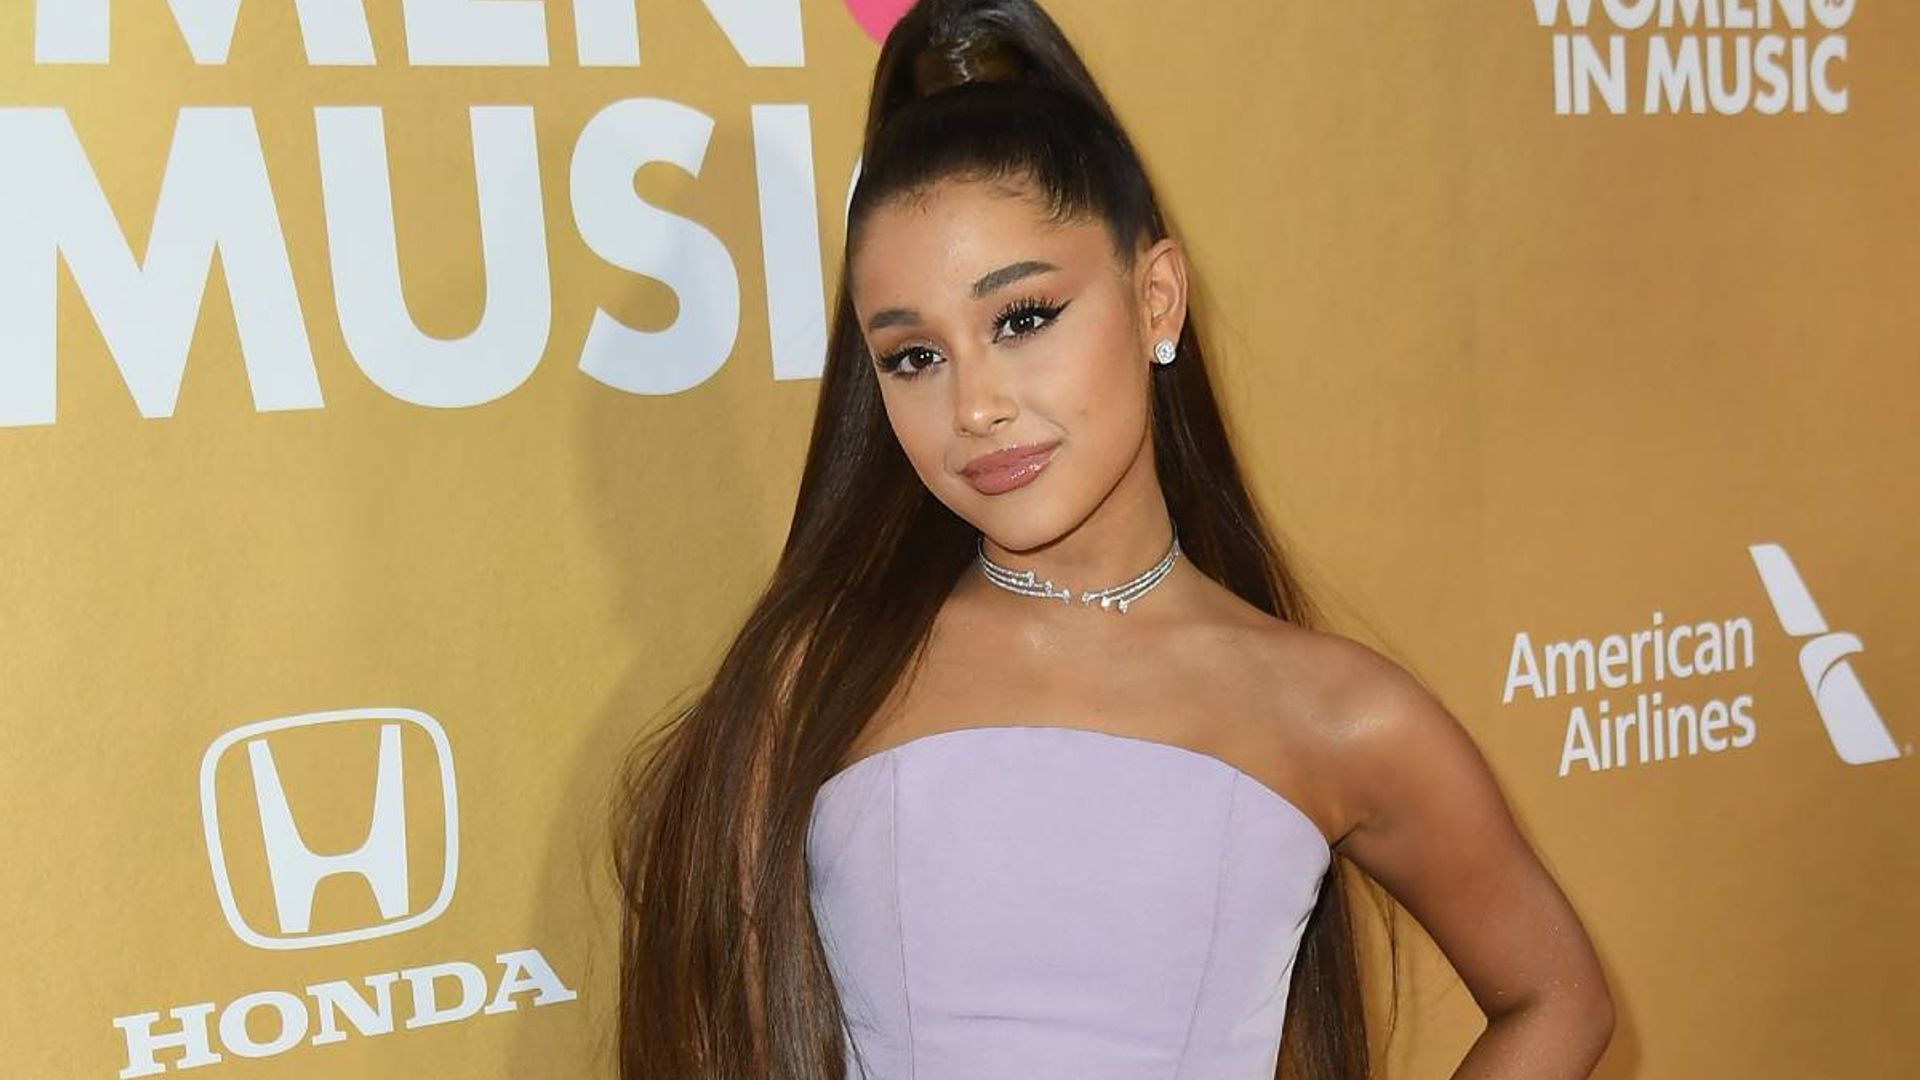 Ariana Grande causes a stir with an unexpected glam look that has an exciting twist